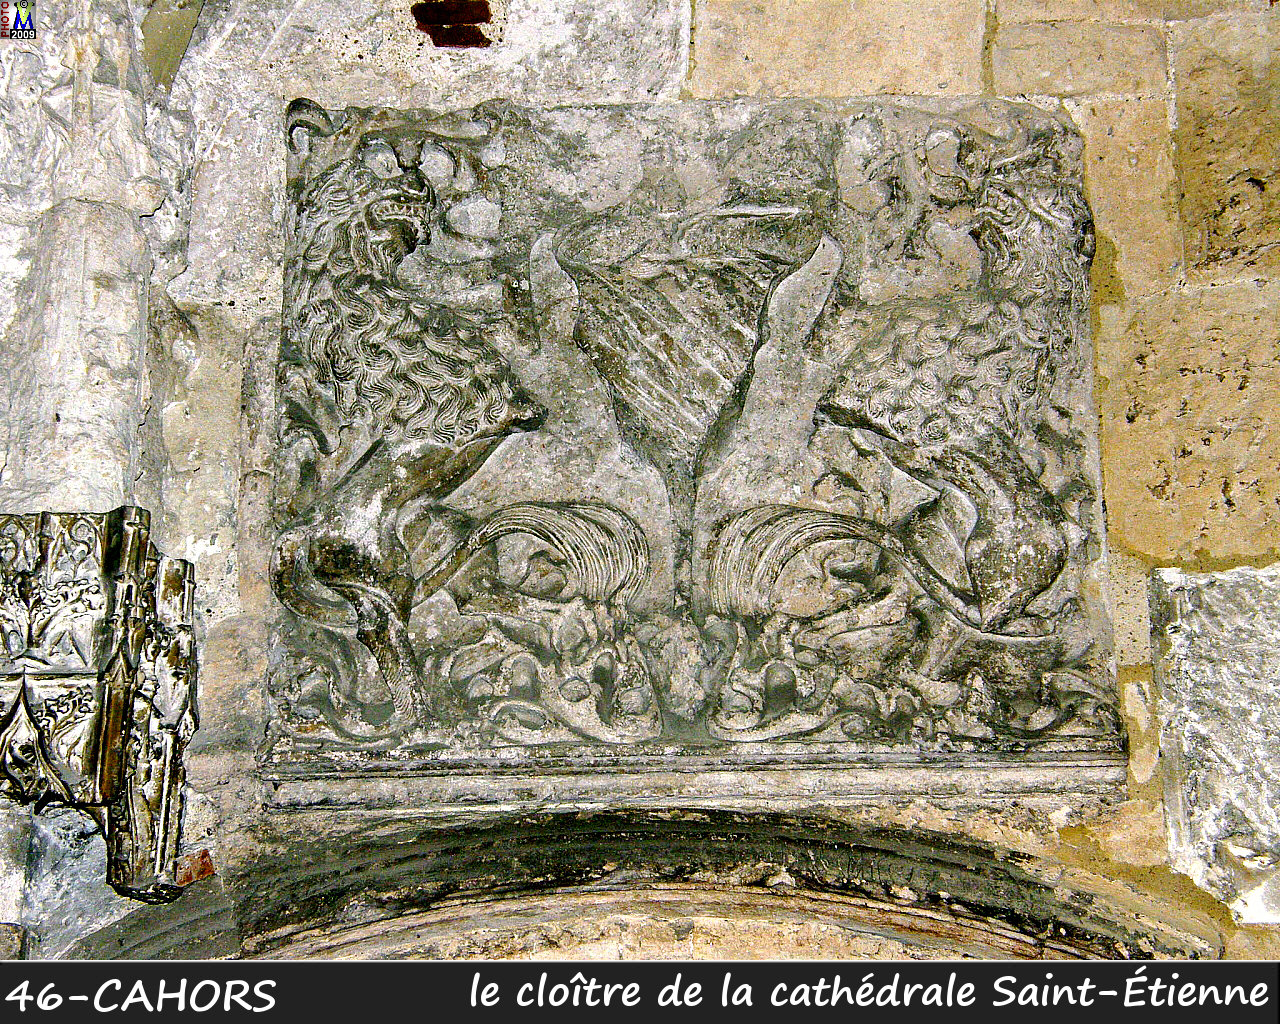 46CAHORS_cathedrale_324.jpg